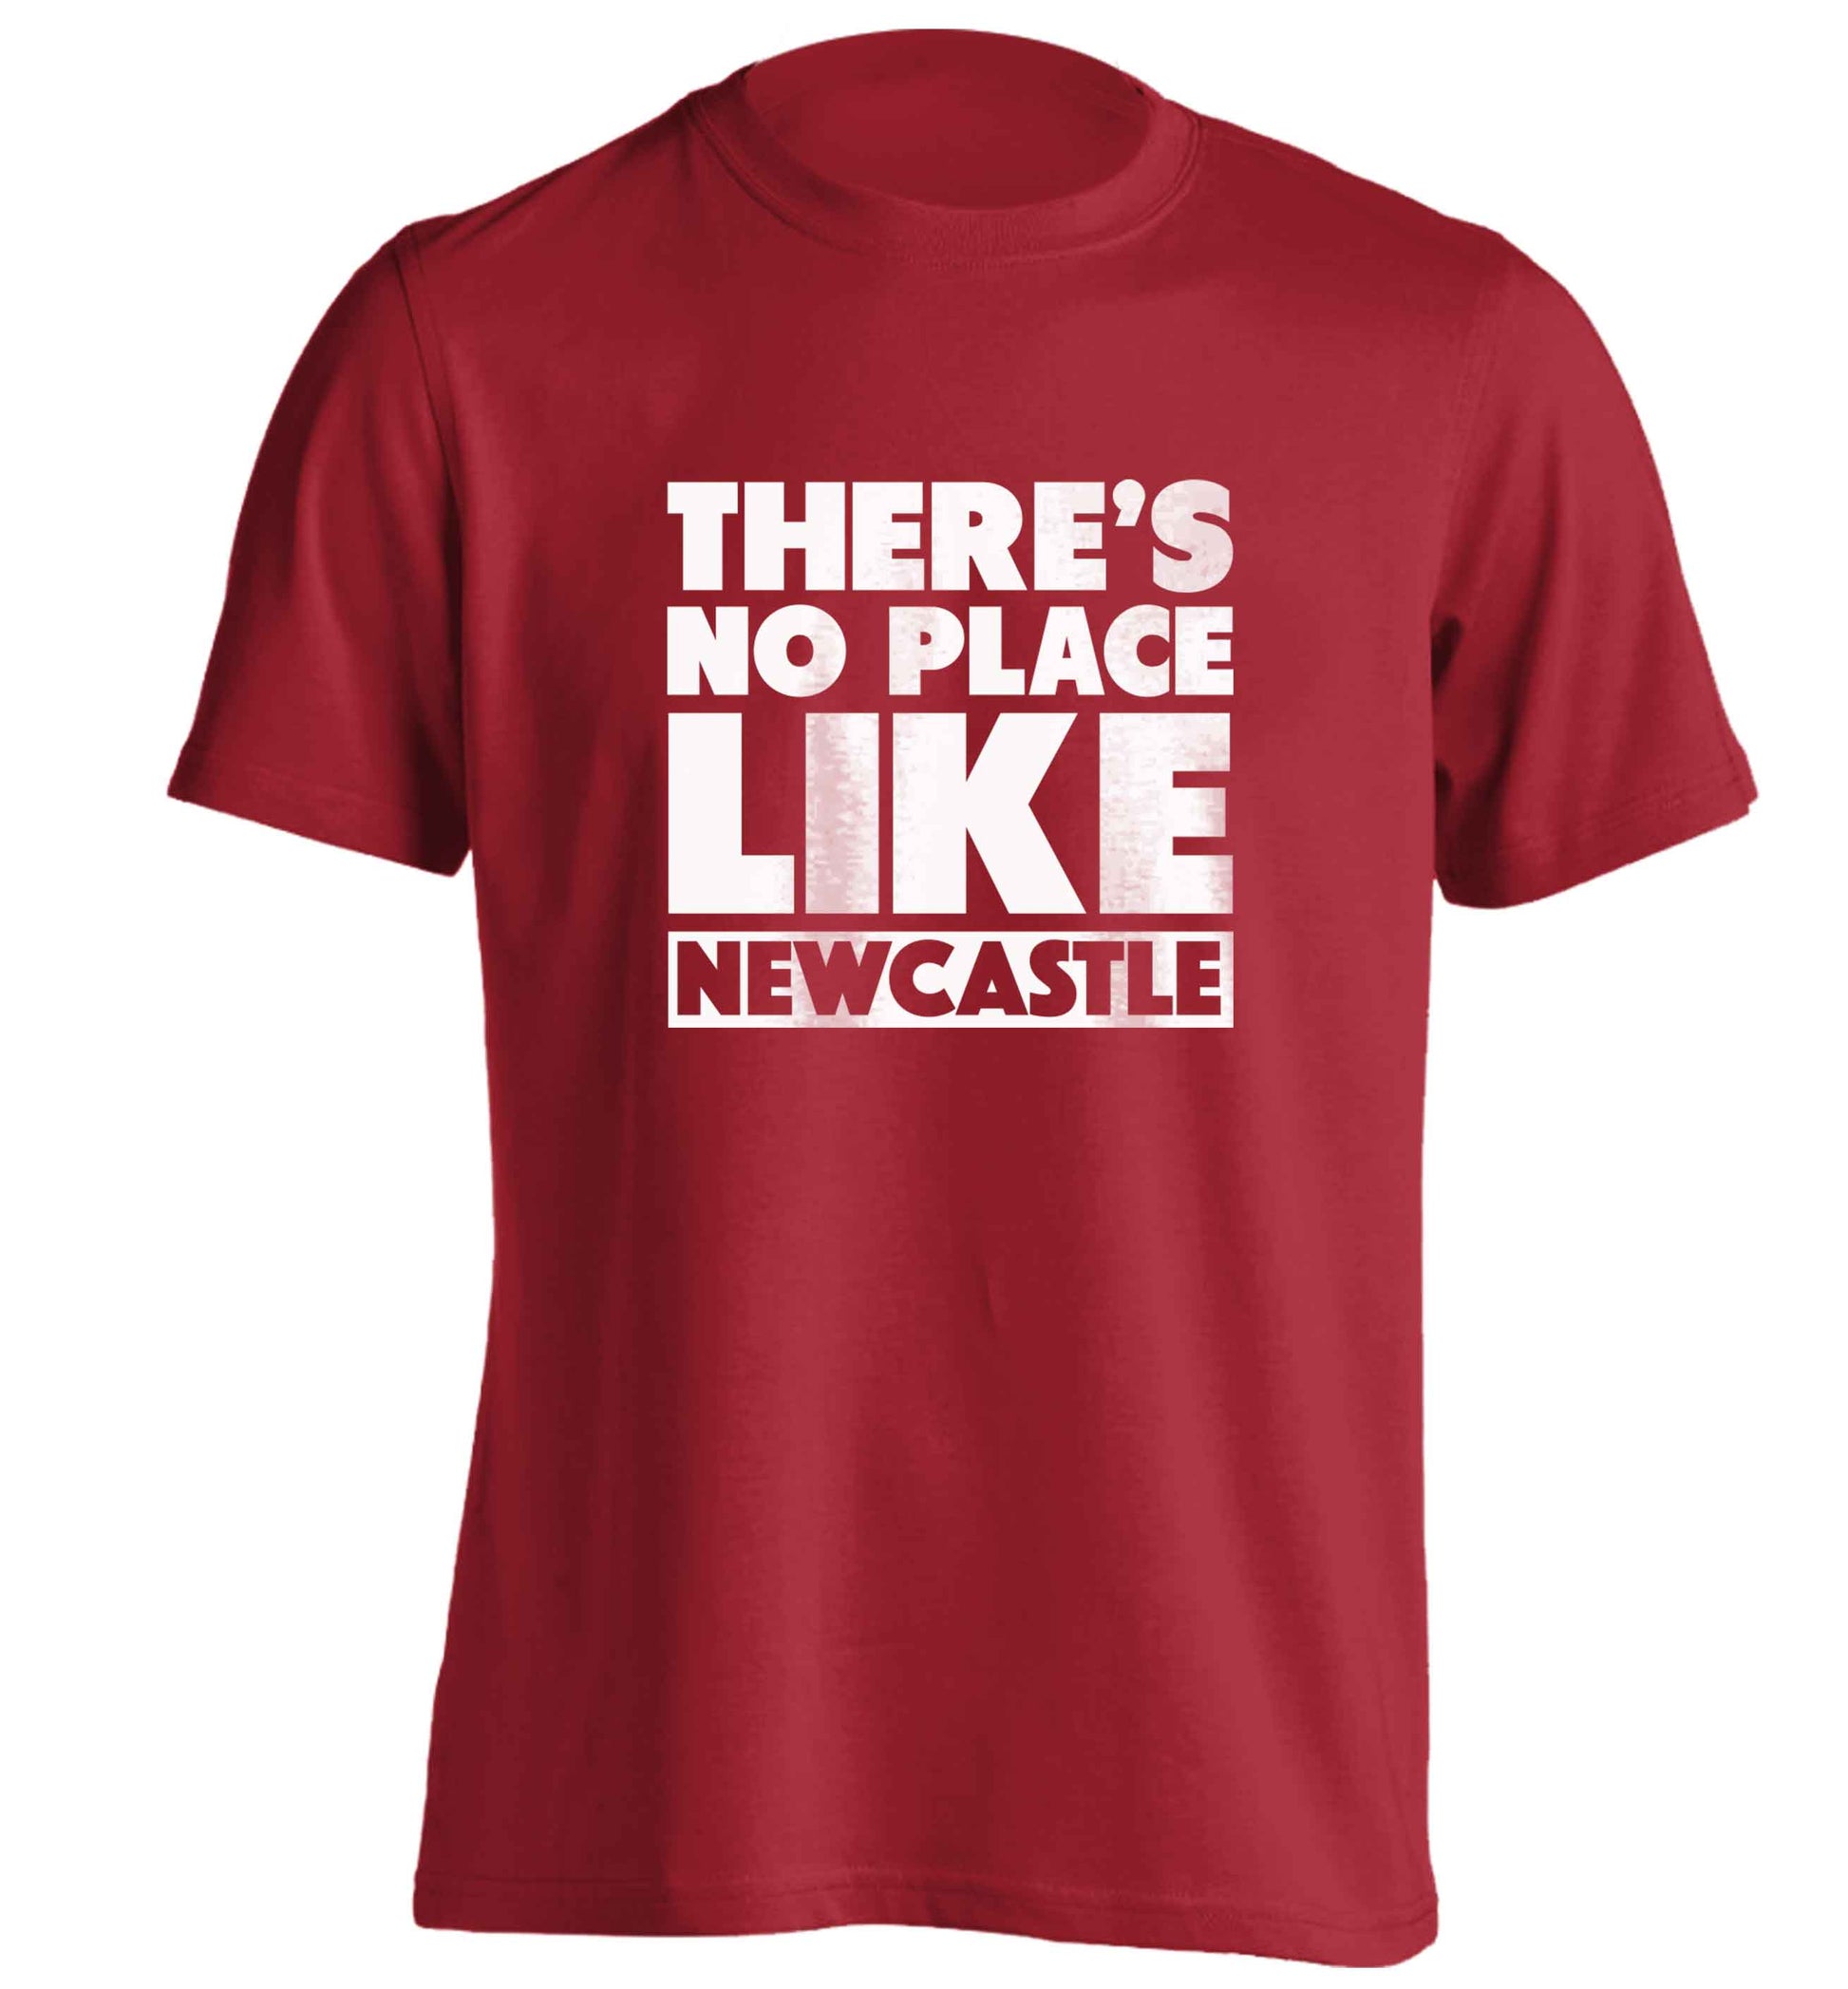 There's no place like Newcastle adults unisex red Tshirt 2XL